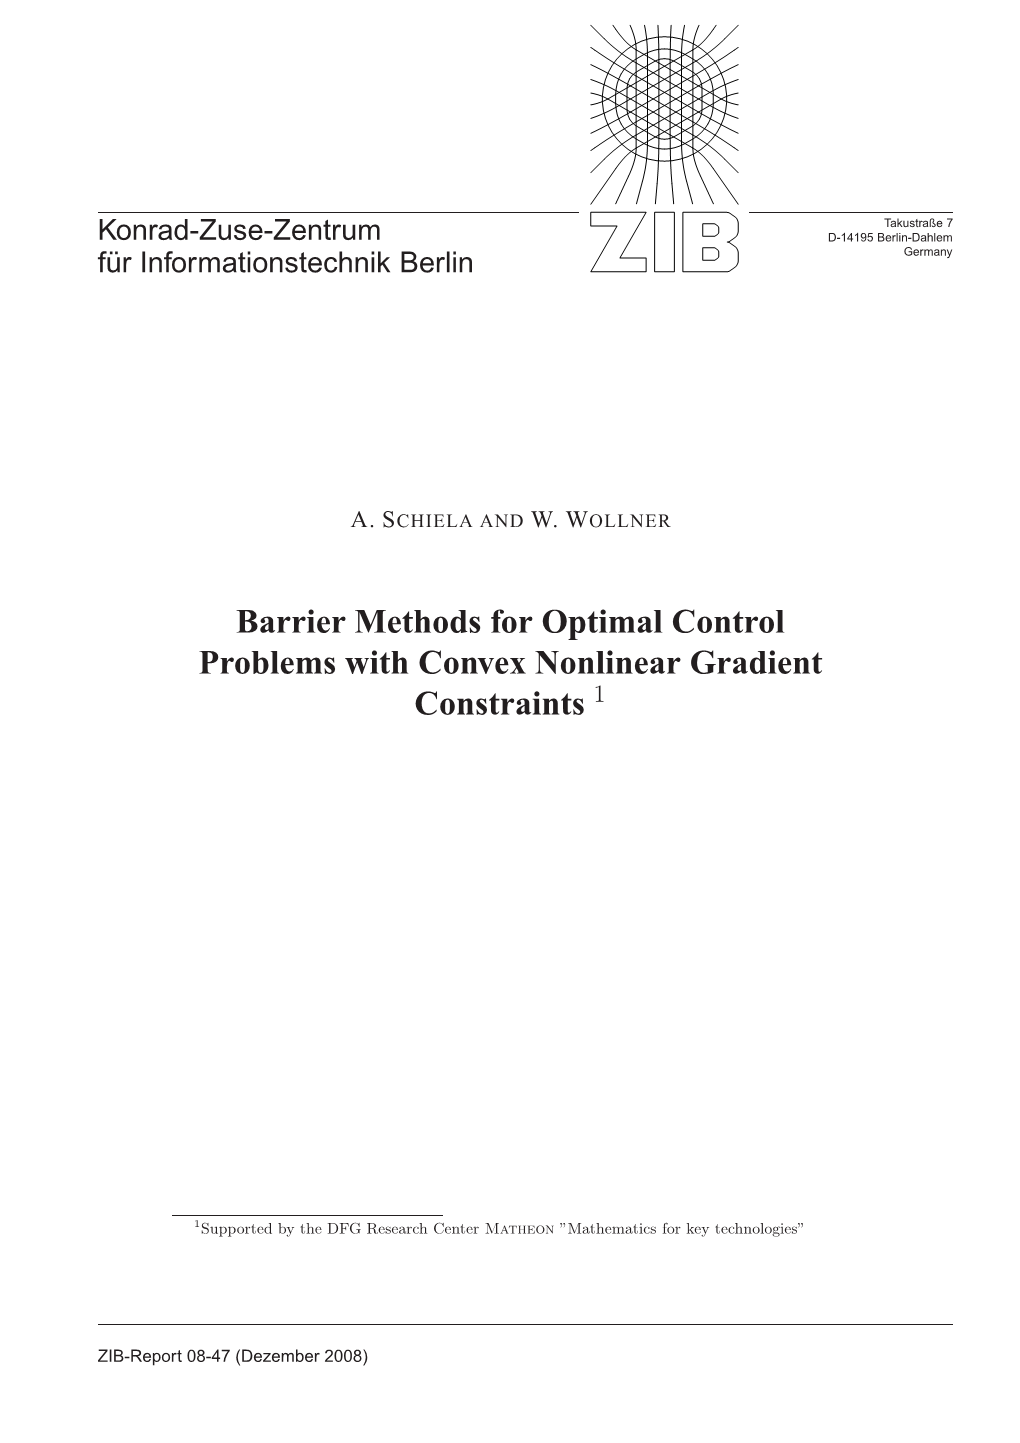 Barrier Methods for Optimal Control Problems with Convex Nonlinear Gradient Constraints 1